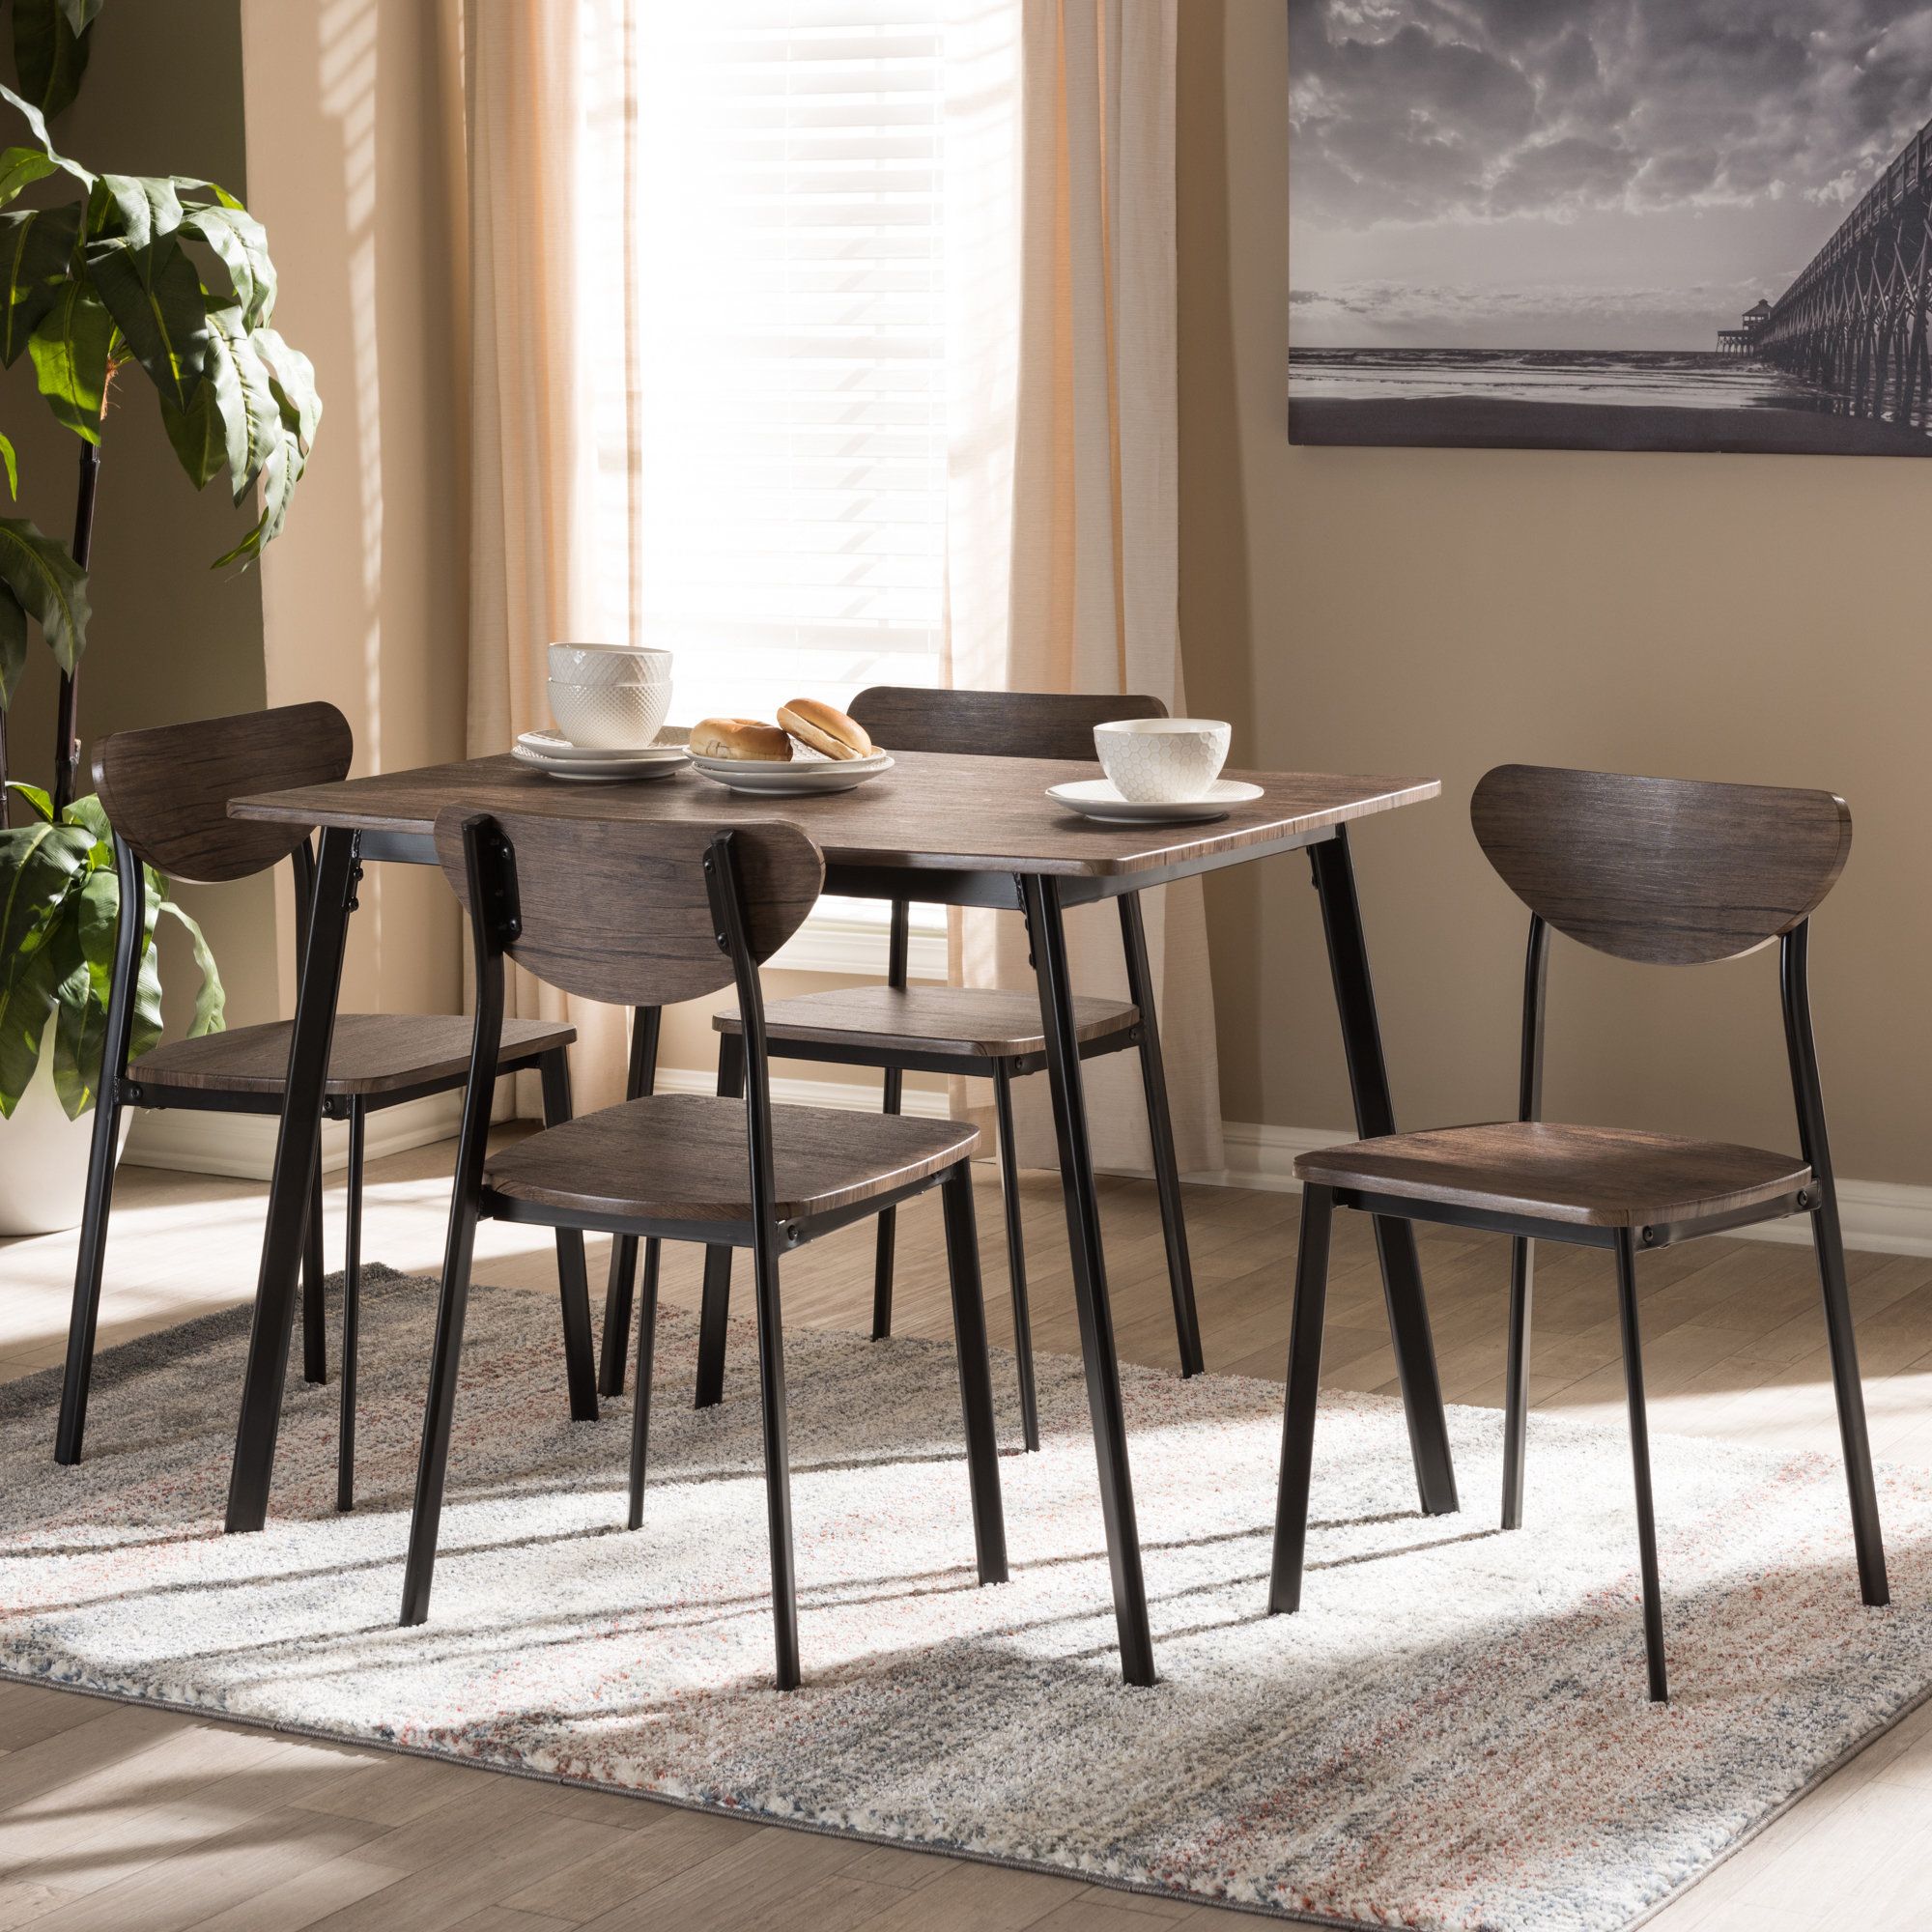 Details About Union Rustic Tejeda 5 Piece Dining Set With Regard To Latest Tejeda 5 Piece Dining Sets (Photo 2 of 20)